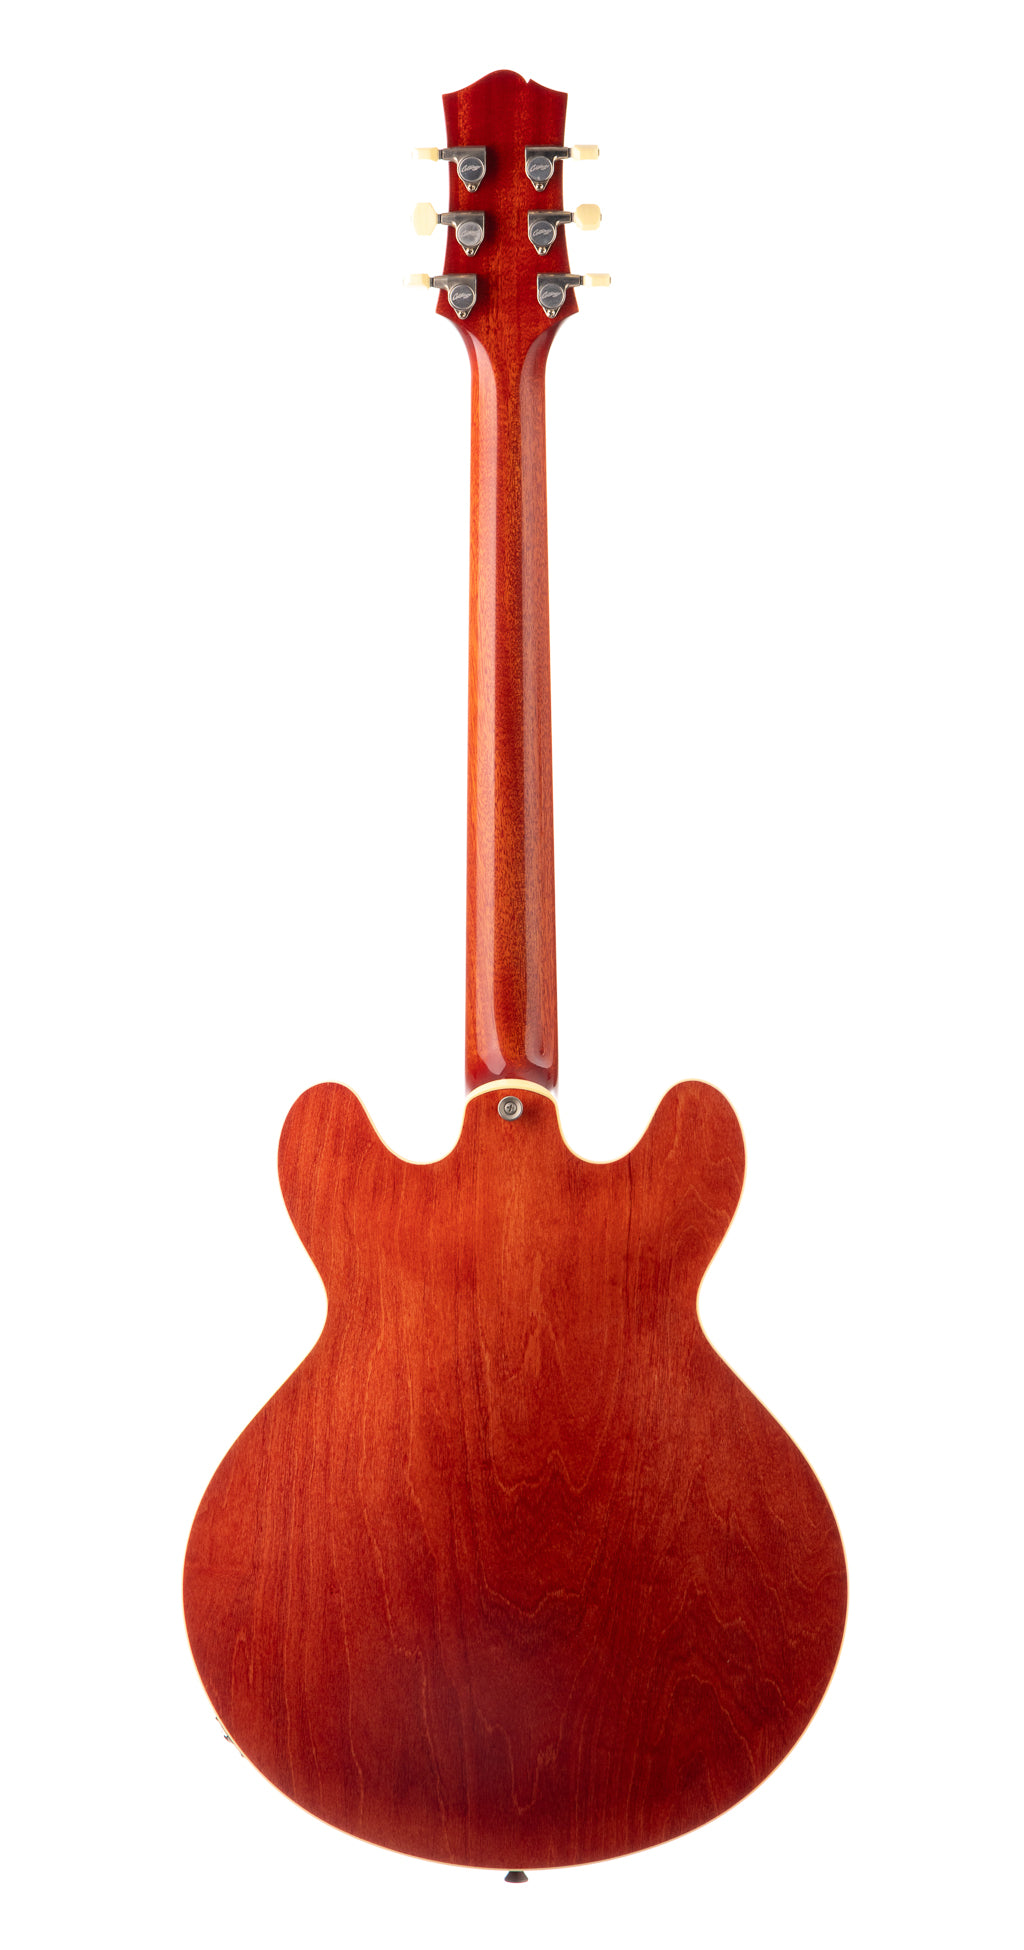 Collings I35-LC Vintage - Aged Faded Cherry (202)